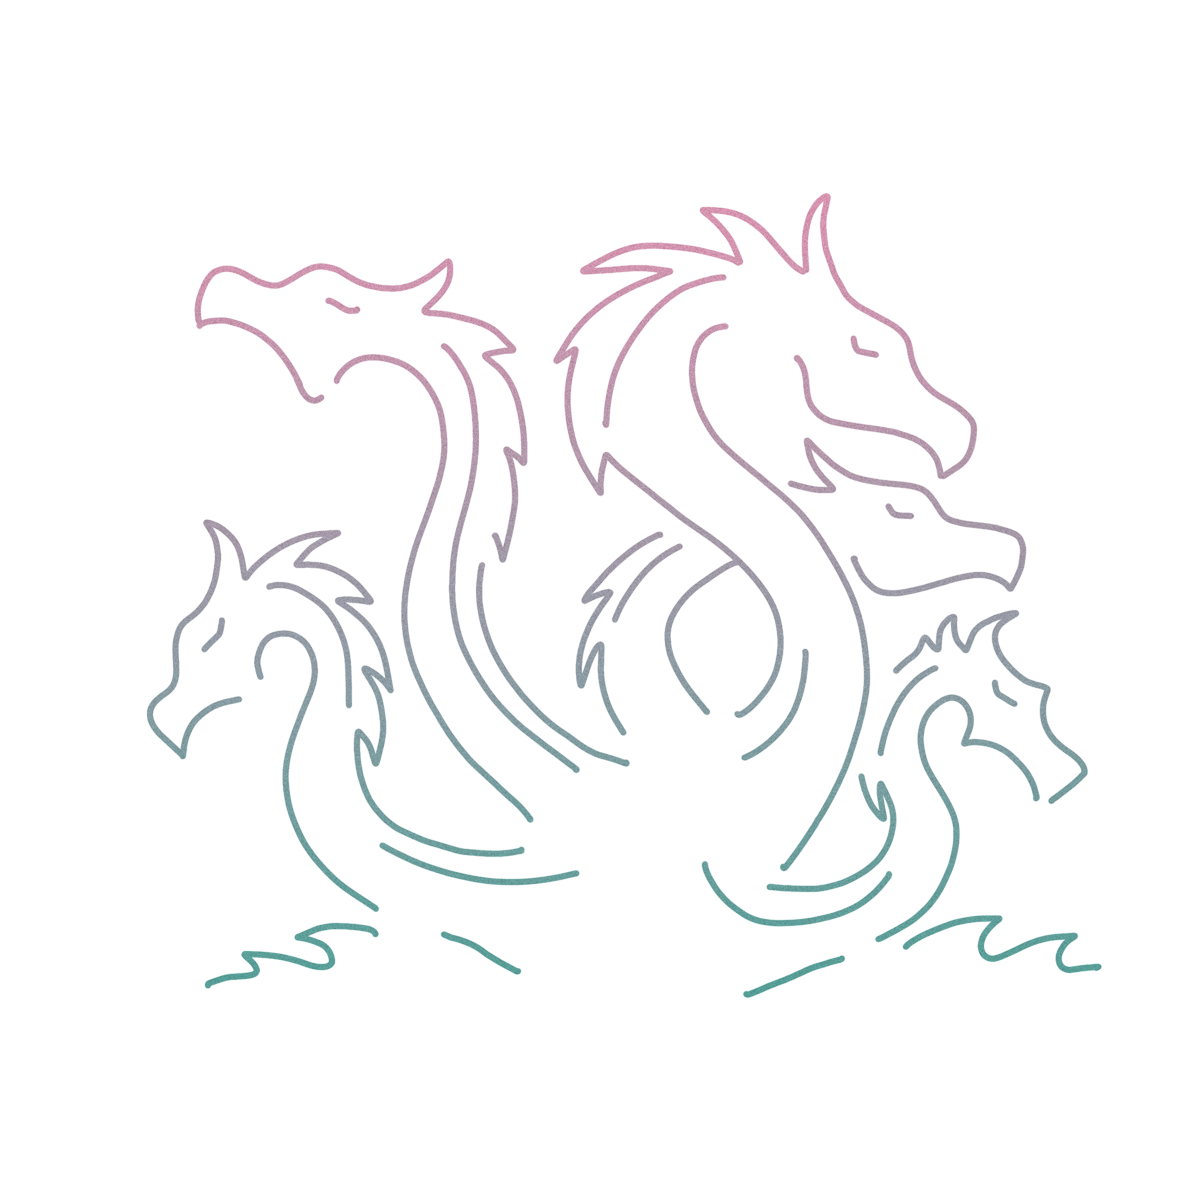 Line illustration of the mythical creature hydra